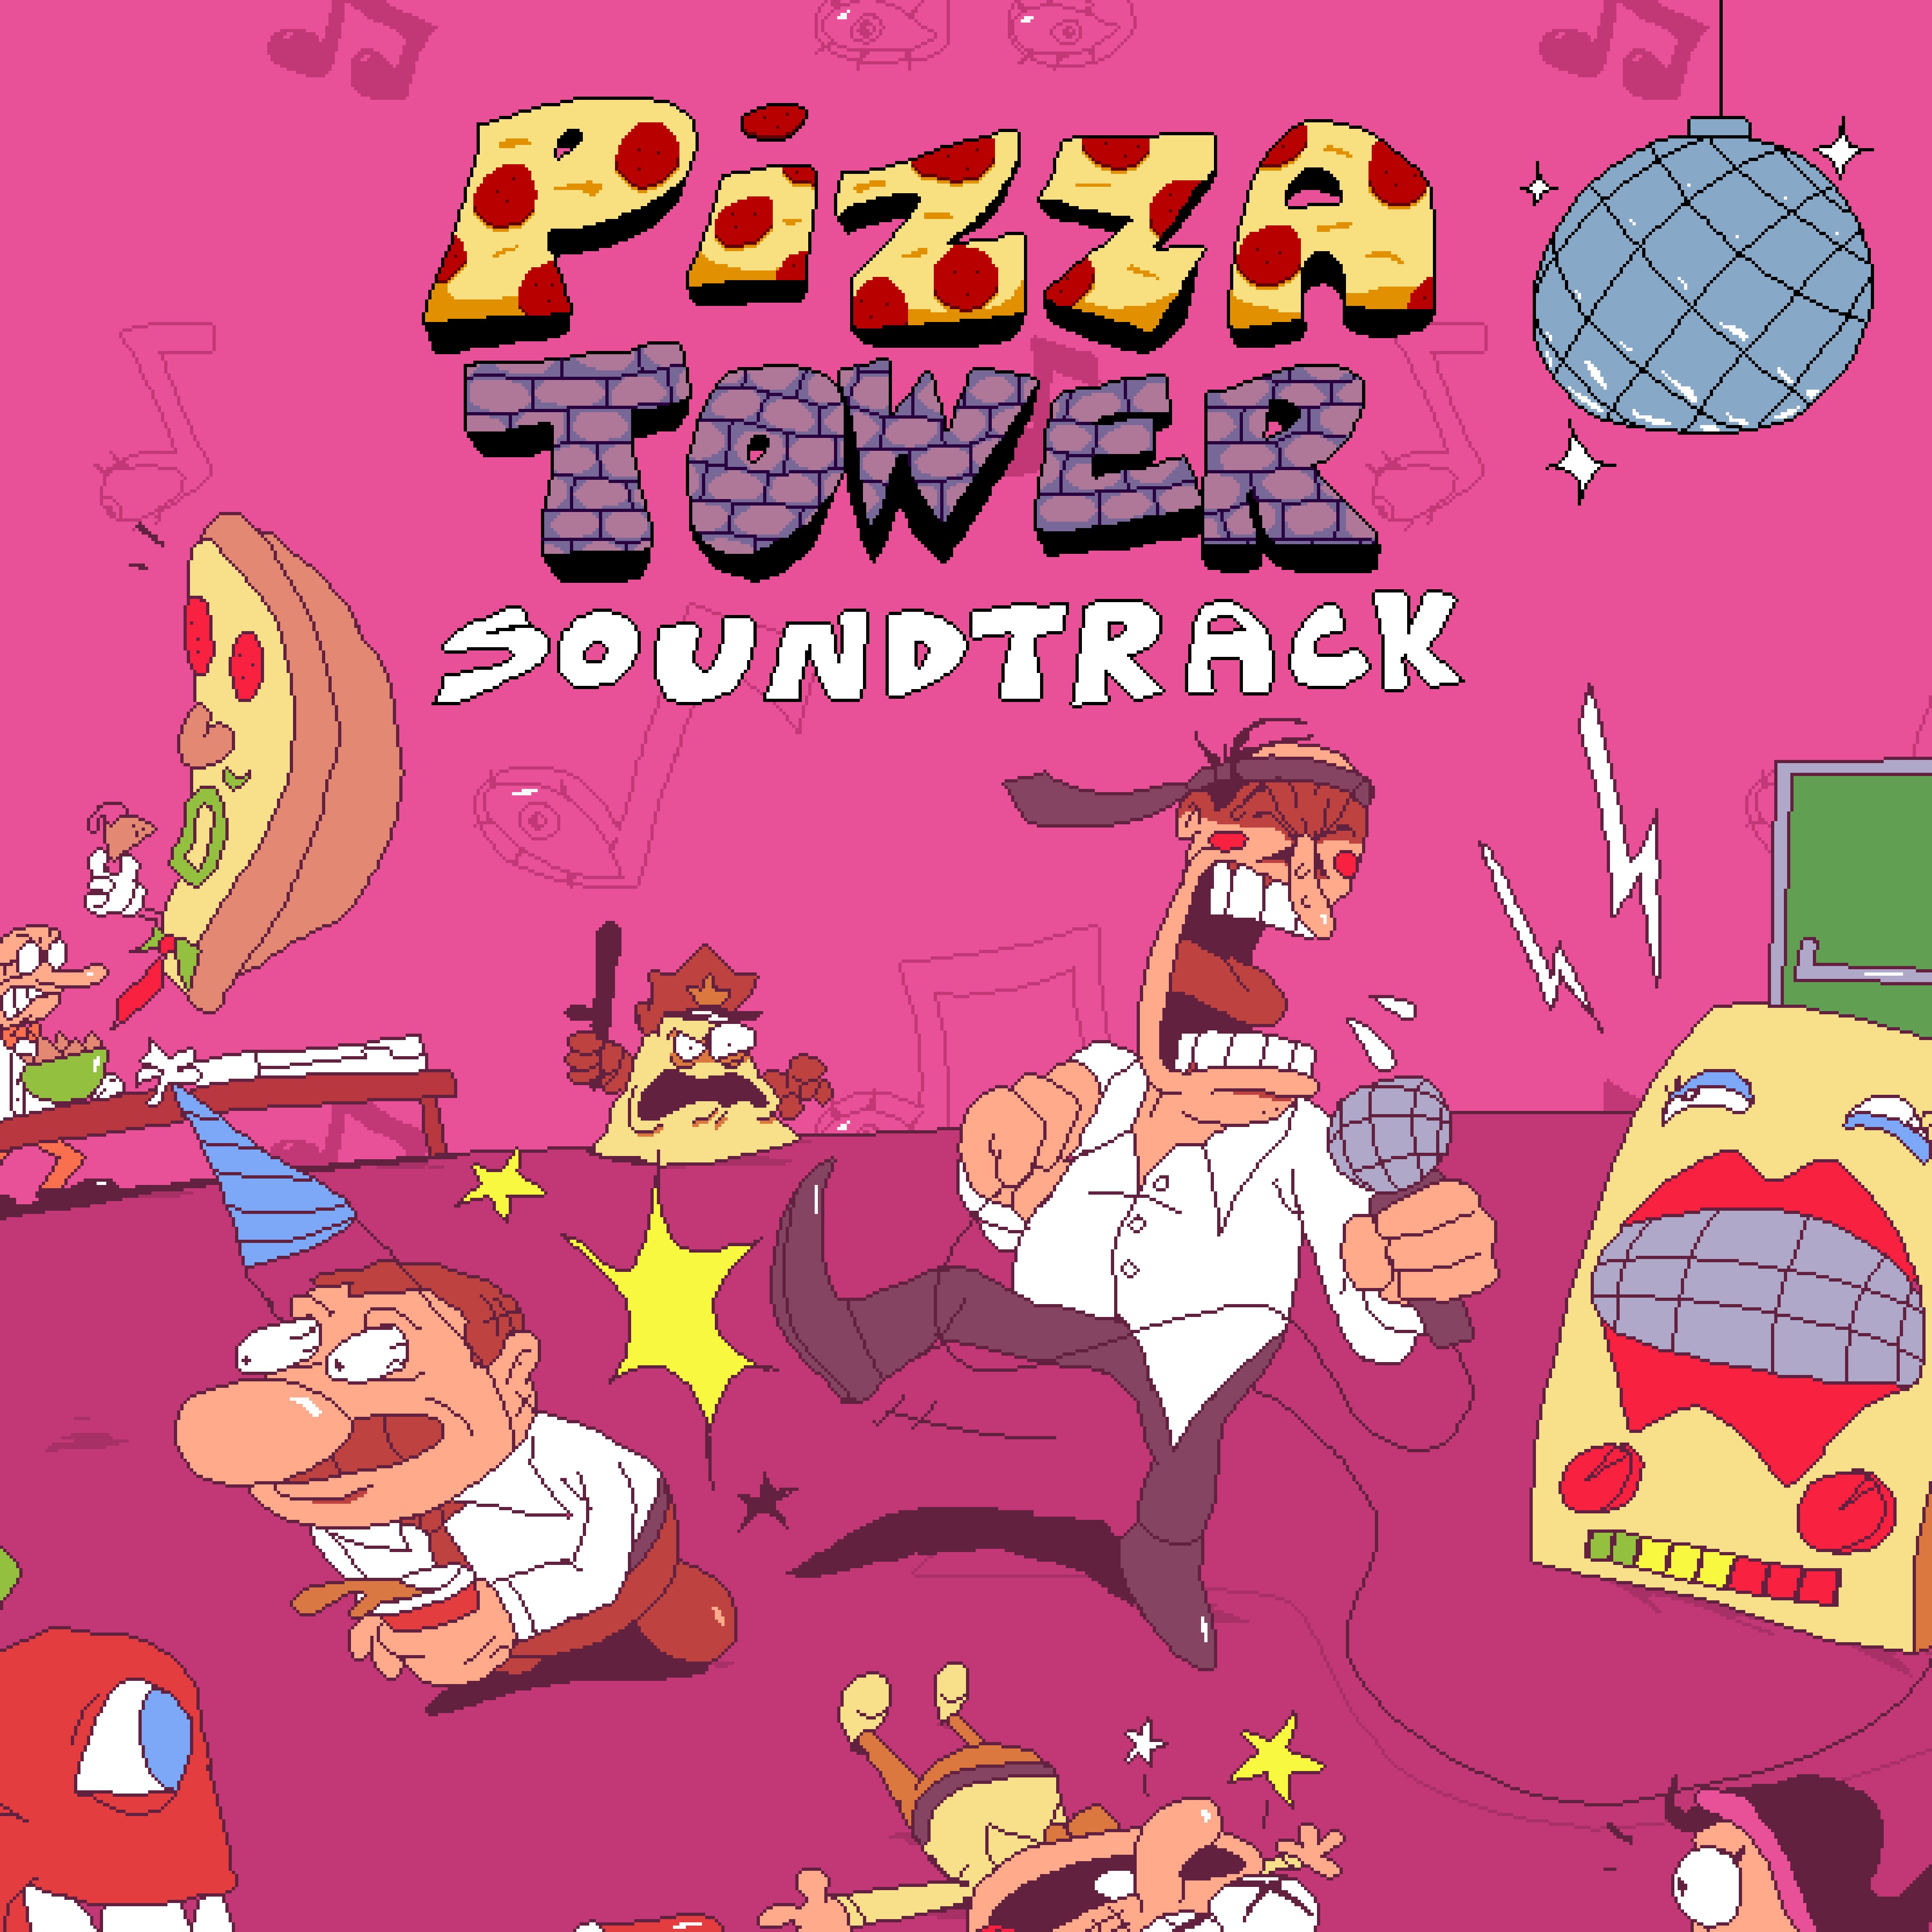 Pizza tower ost noise. Pizza Tower игра. Pizza Tower OST. Pizza Tower OST it's pizza time. Pizza Tower стим.